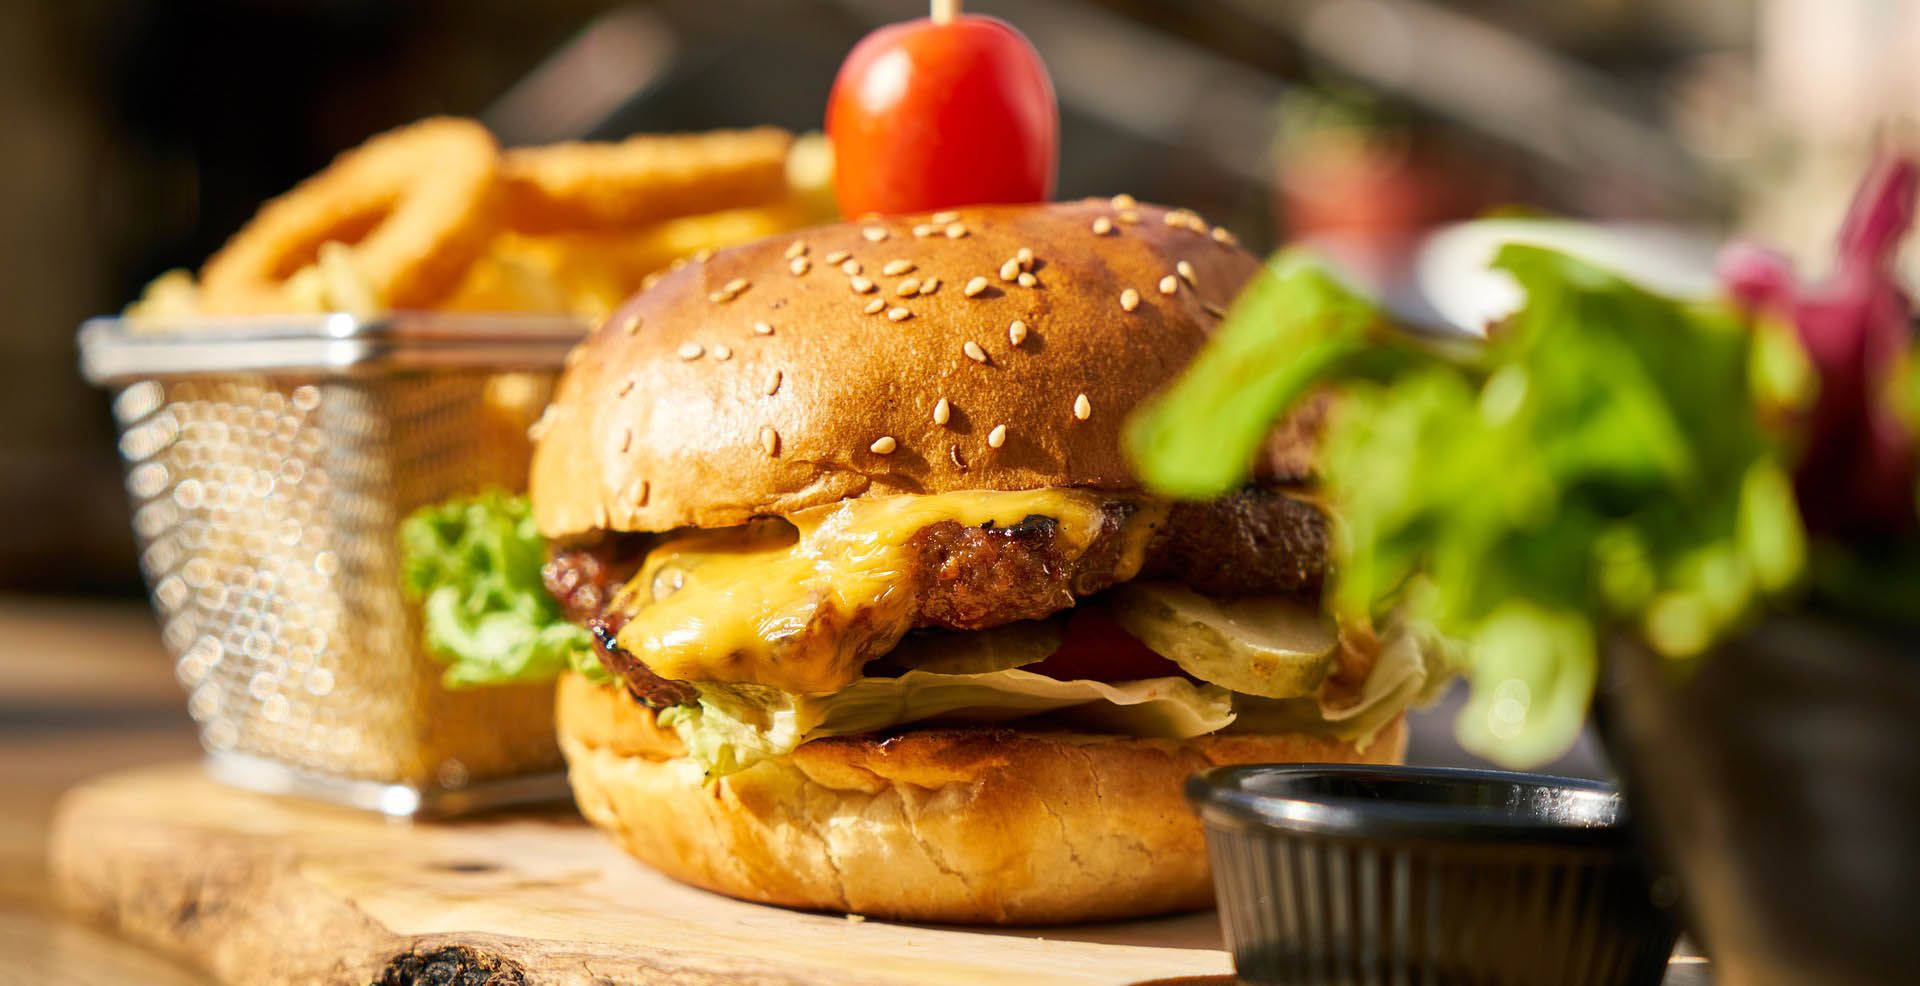 Great pub food - Our classic burgers